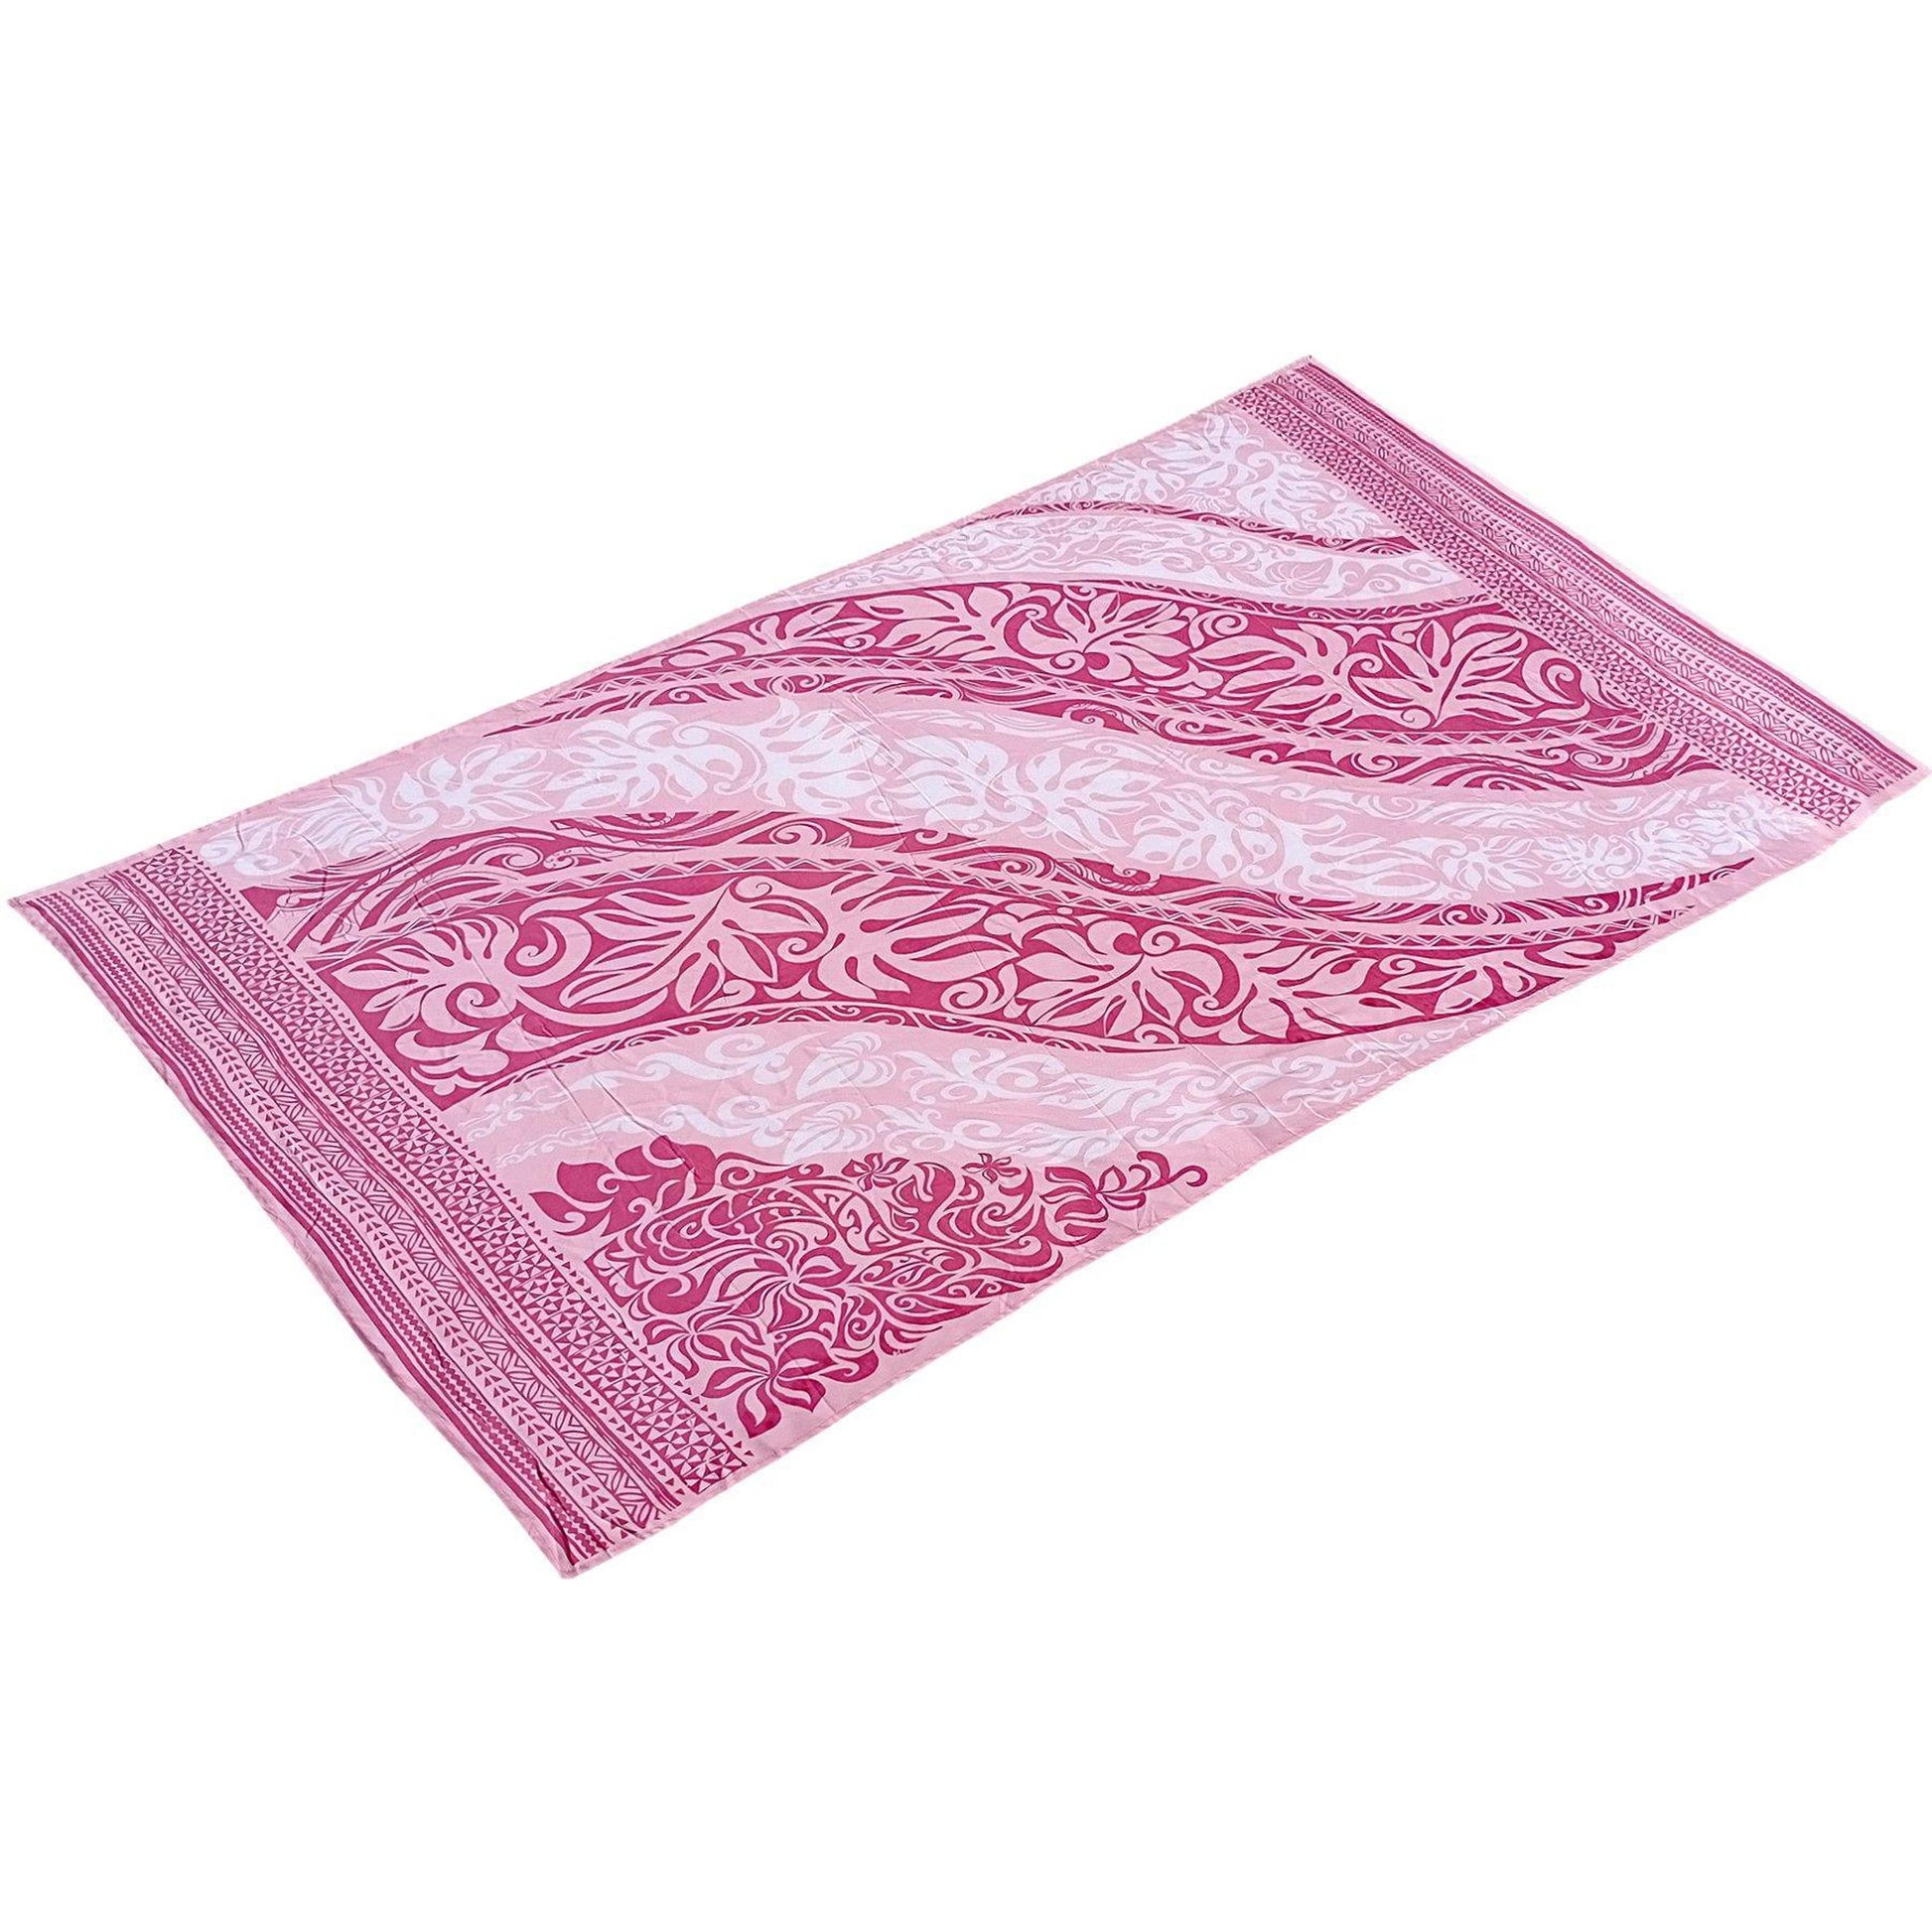 Pink Rayon Scarf/Stole 111x180 cms - The Teal Thread